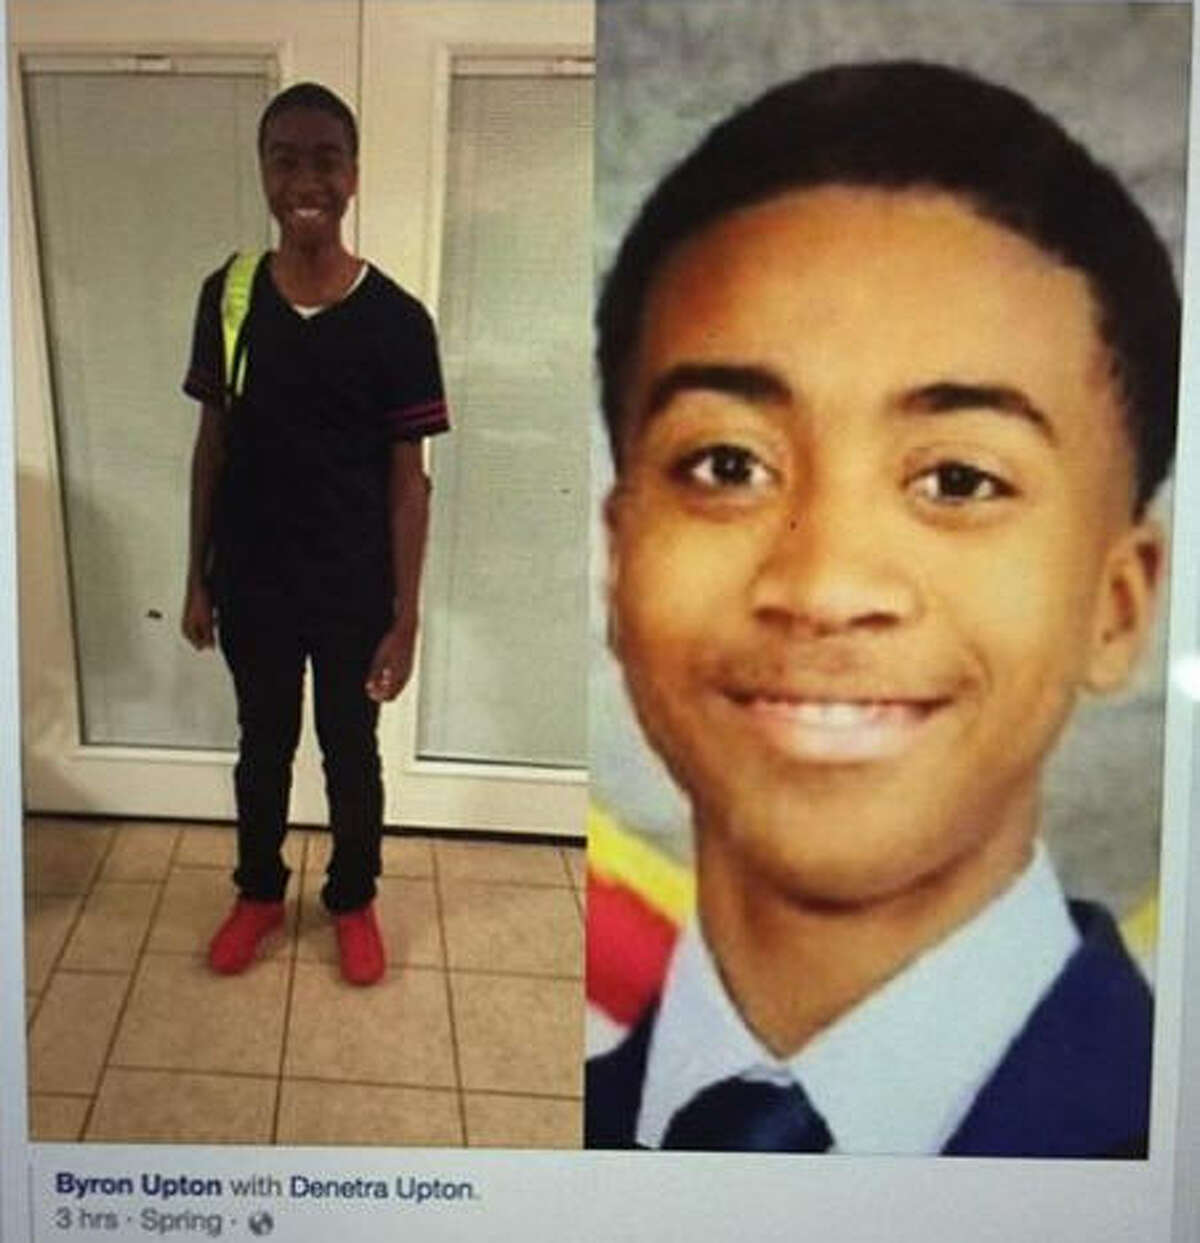 Nicholas Upton, 16, of Spring,left home Friday afternoon, March 17, 2017, and has not been in touch with his parents. He is a sophomore at Klein Oak High School. Facebook via Byron UptonKeep clicking to see a gallery of other missing persons throughout Texas: